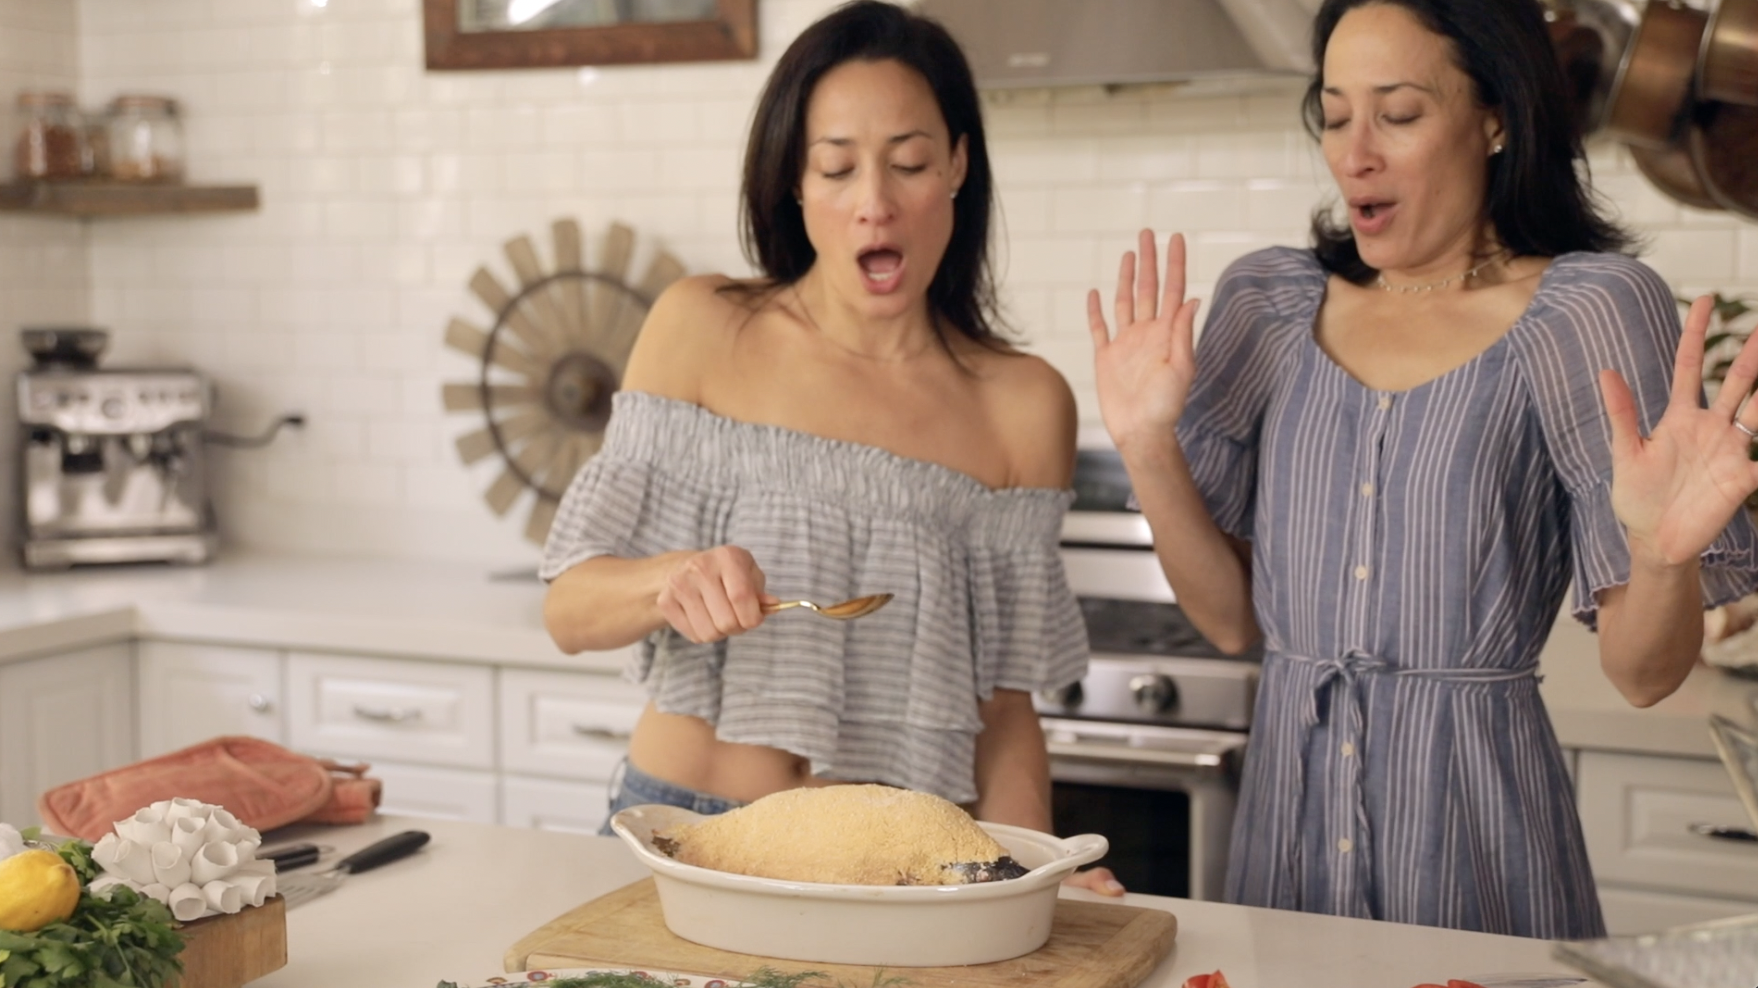 Each episode the twins whip up a tasty recipe chock full of flavor and life lessons.